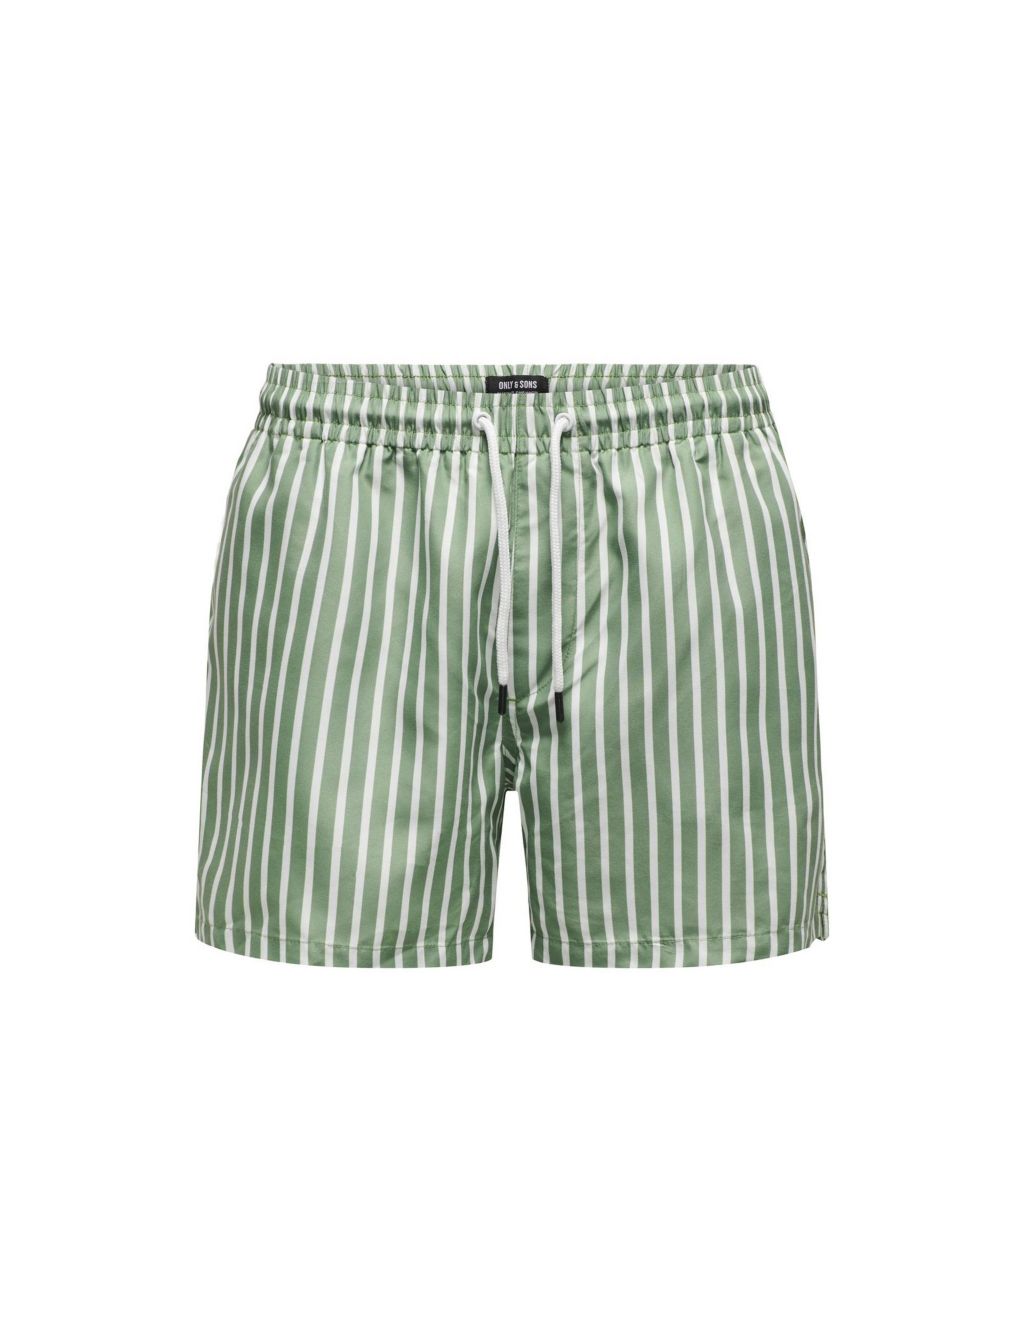 Pocketed Striped Swim Shorts 1 of 6